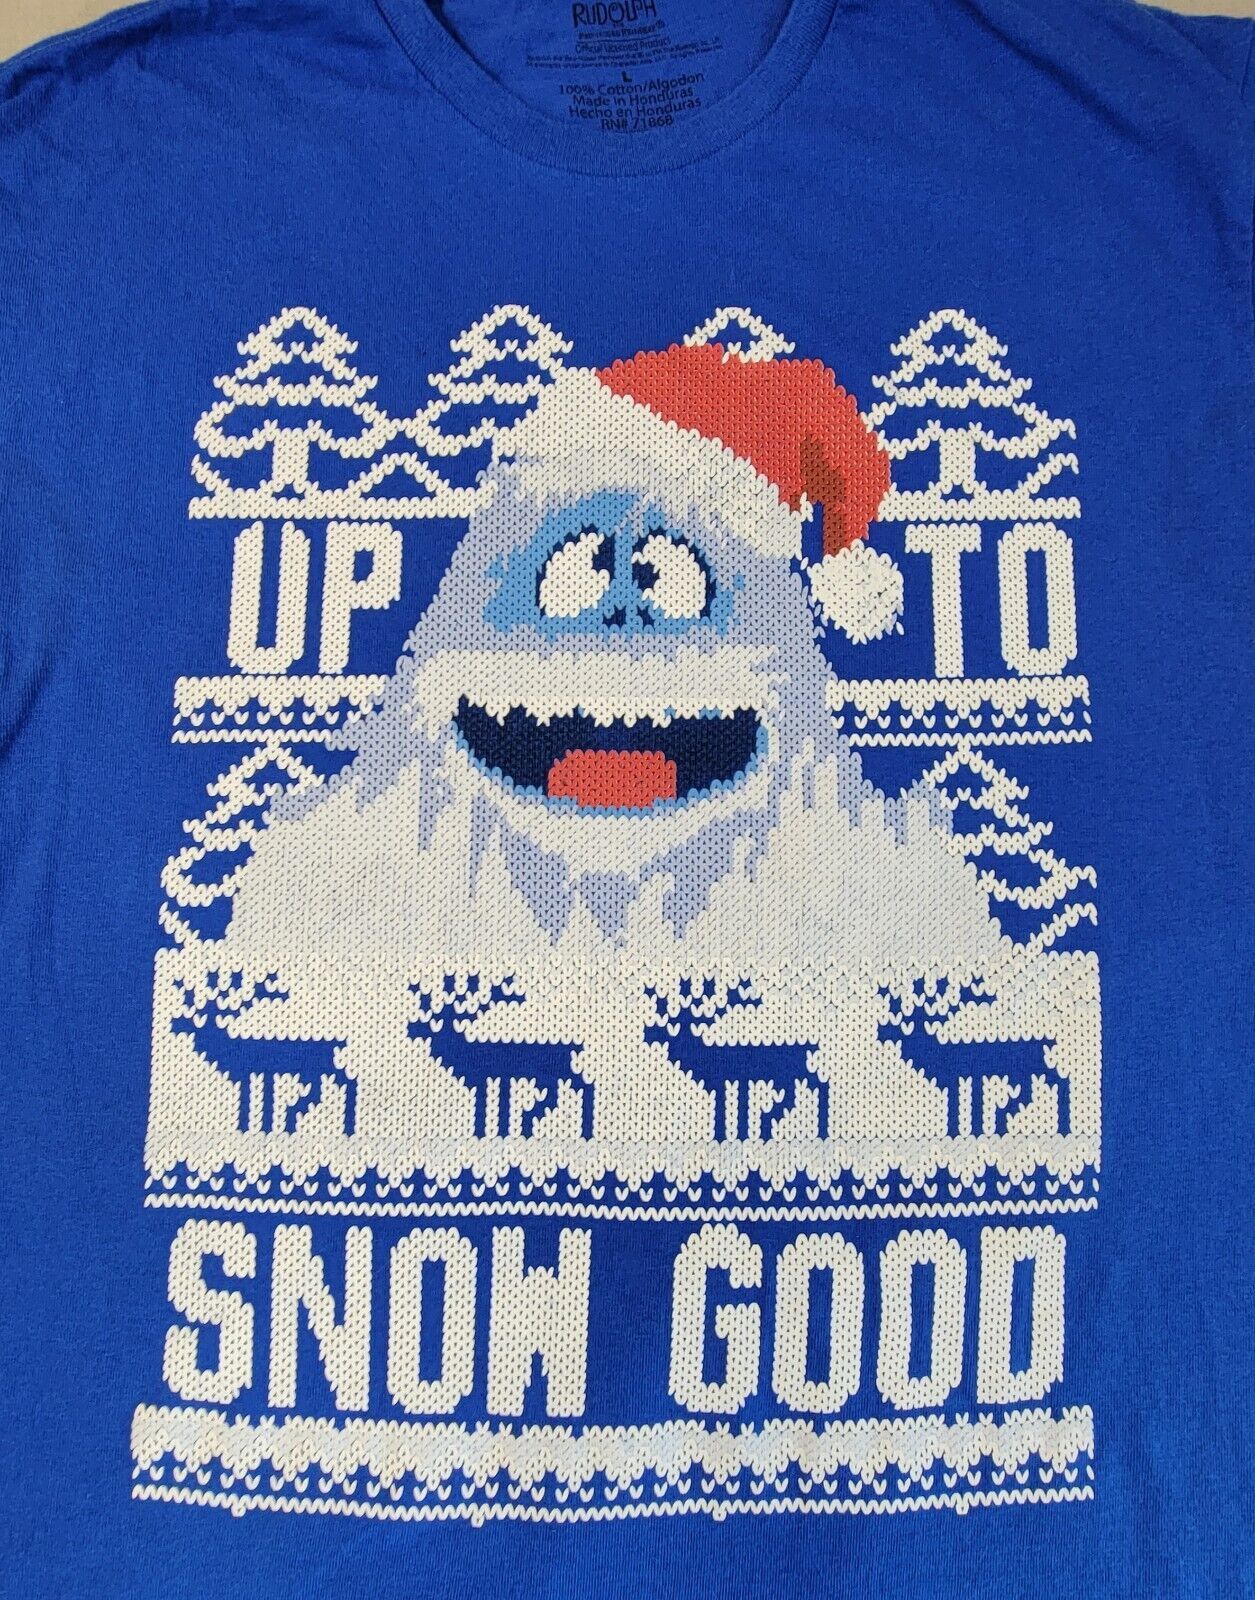 Primary image for Up To Snow Good Rudolf Christmas T Shirt Mens Large Cotton Abominable Snowman